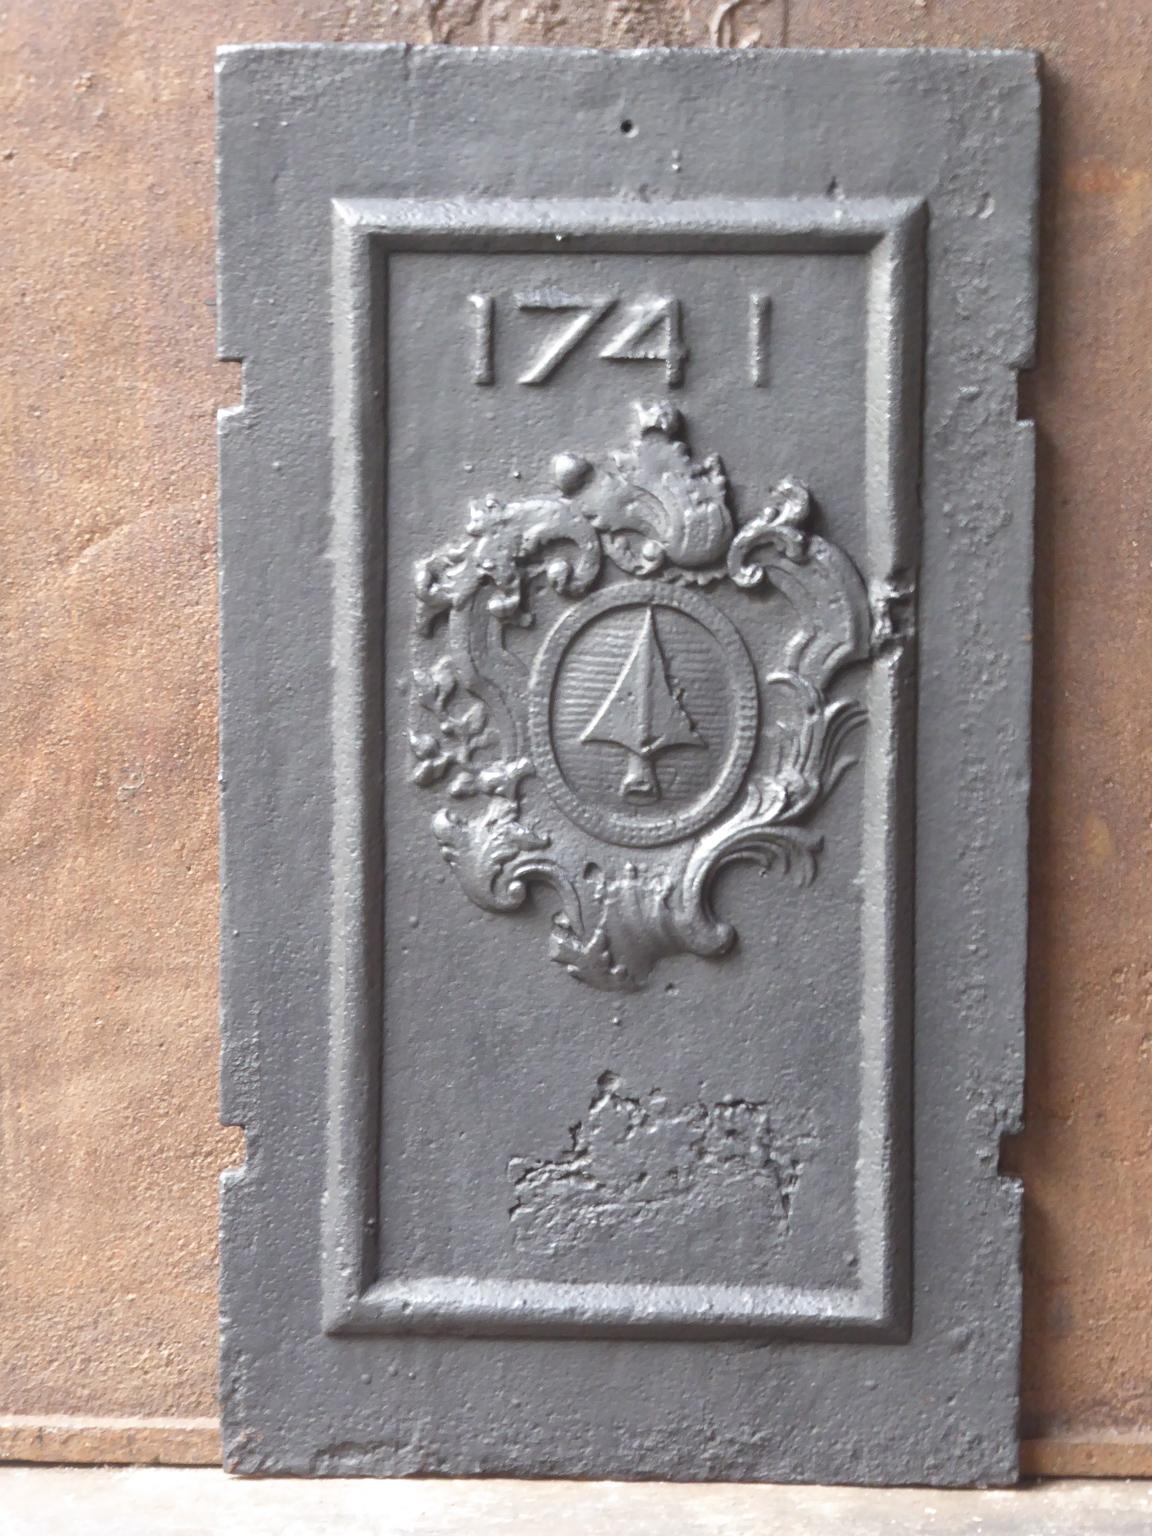 18th century French Louis XIV fireback with a coat of arms and 1741, its year of production. The fireback is made of cast iron. The condition is good.









 